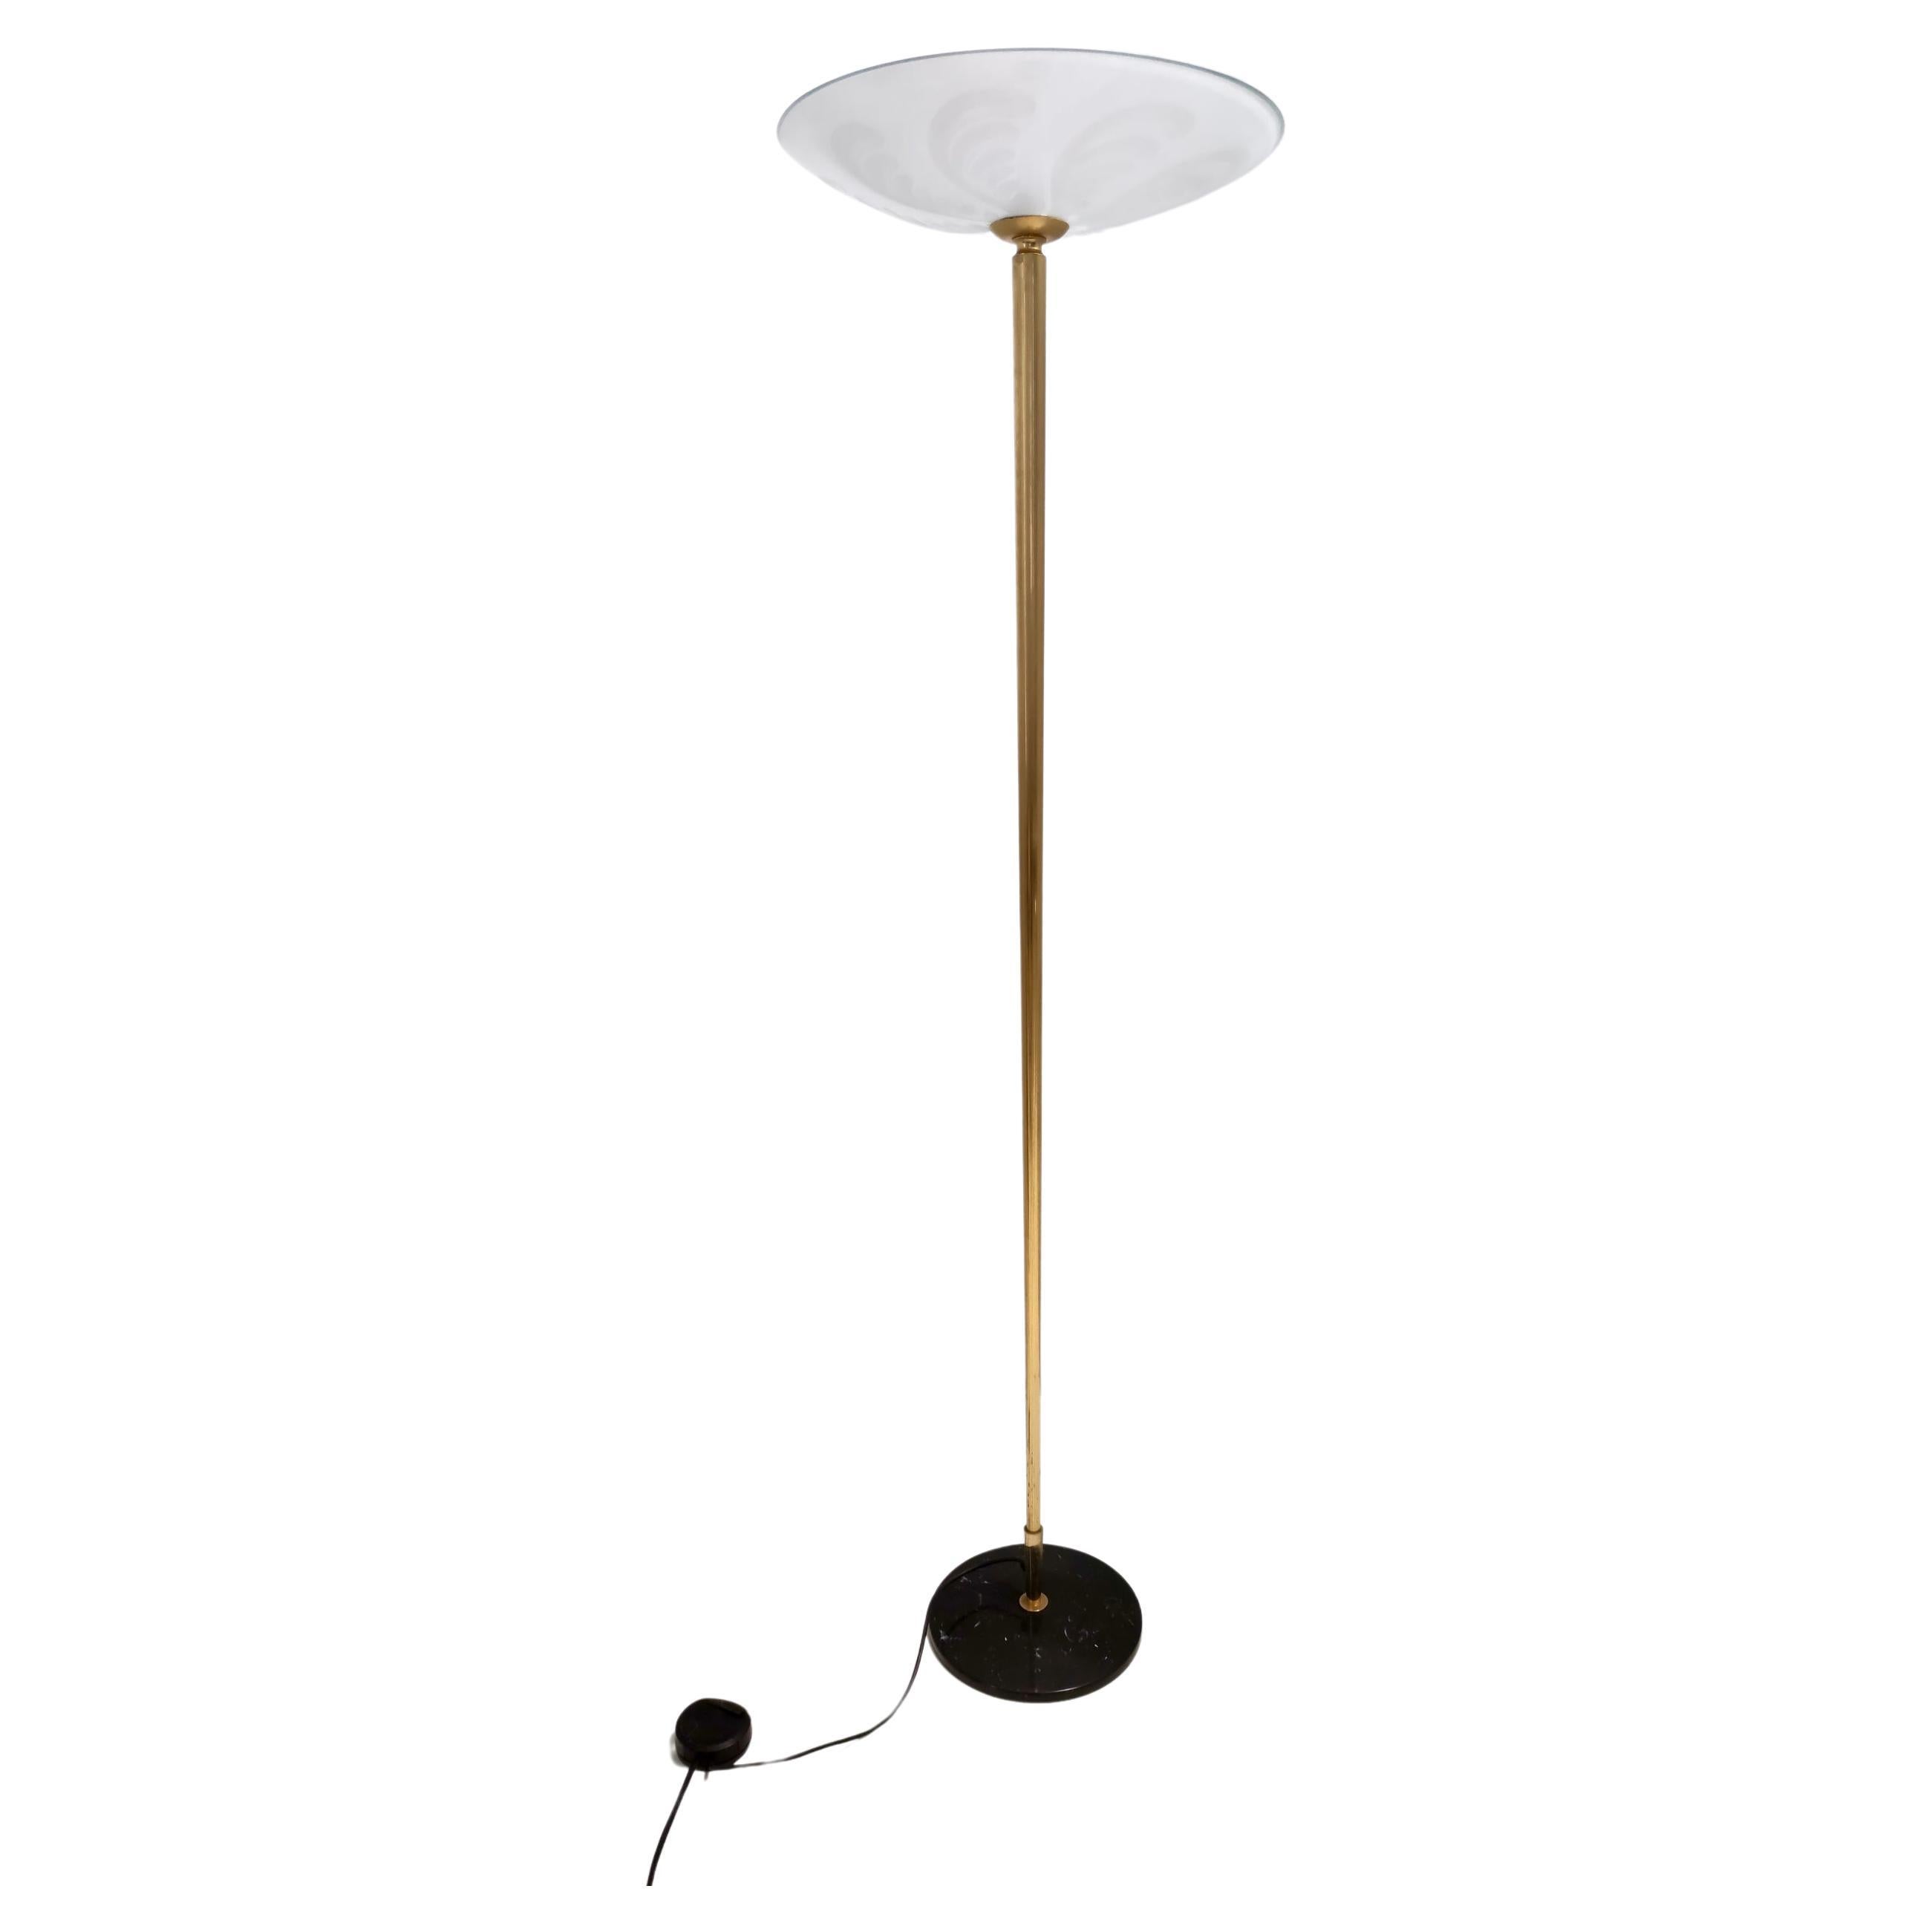 Vintage Brass and Etched Glass Floor Lamp in the style of Fontana Arte, Italy